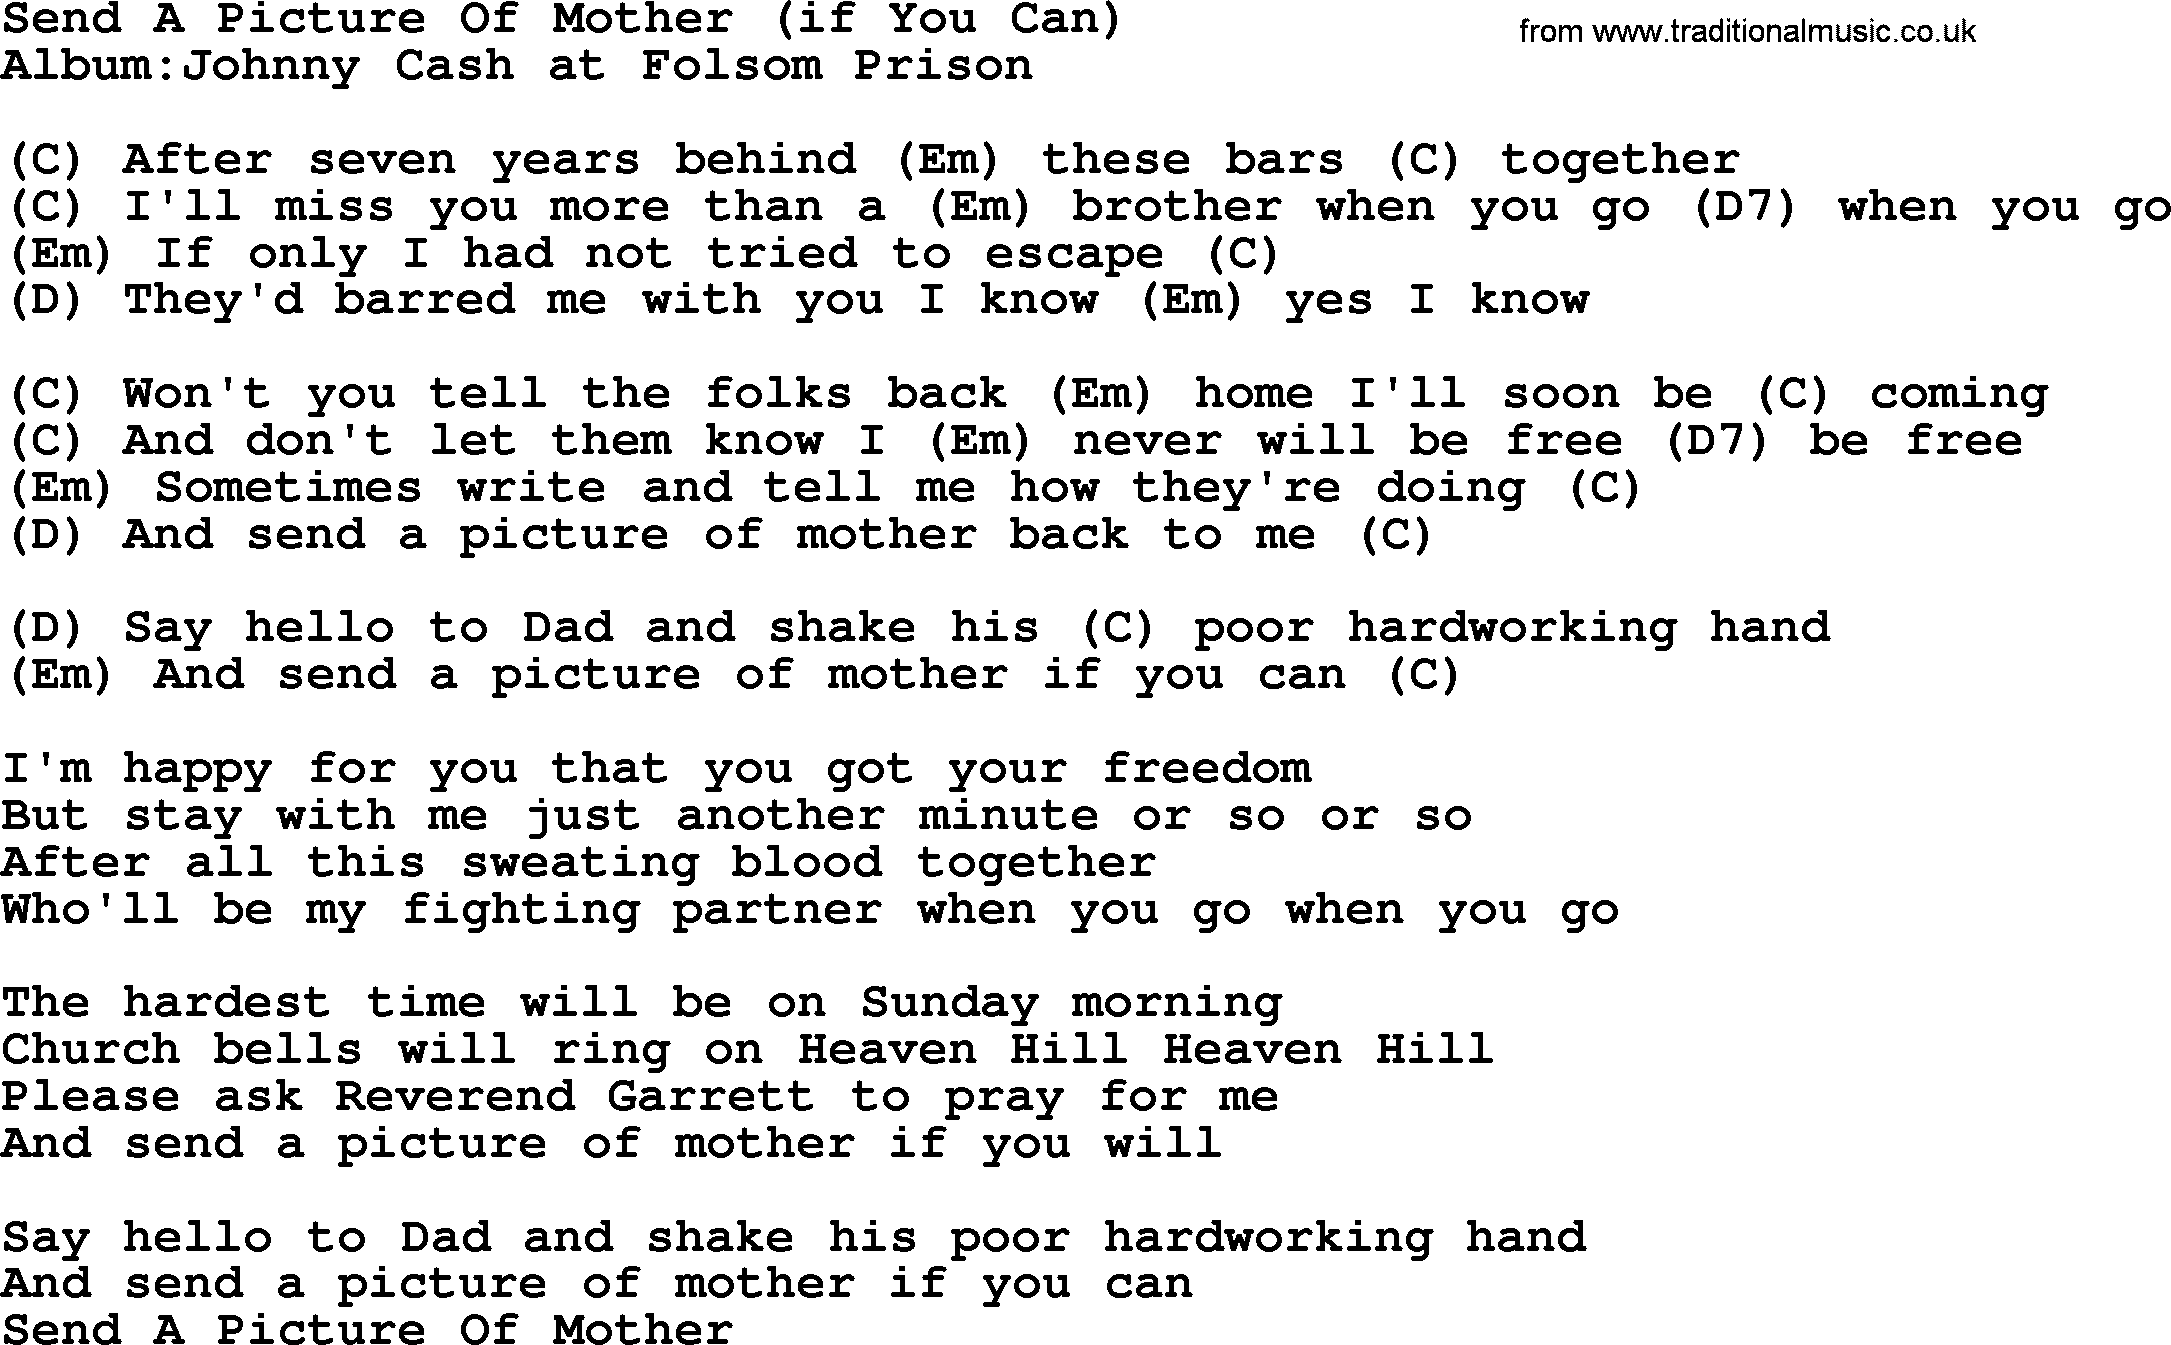 Johnny Cash song Send A Picture Of Mother(If You Can), lyrics and chords